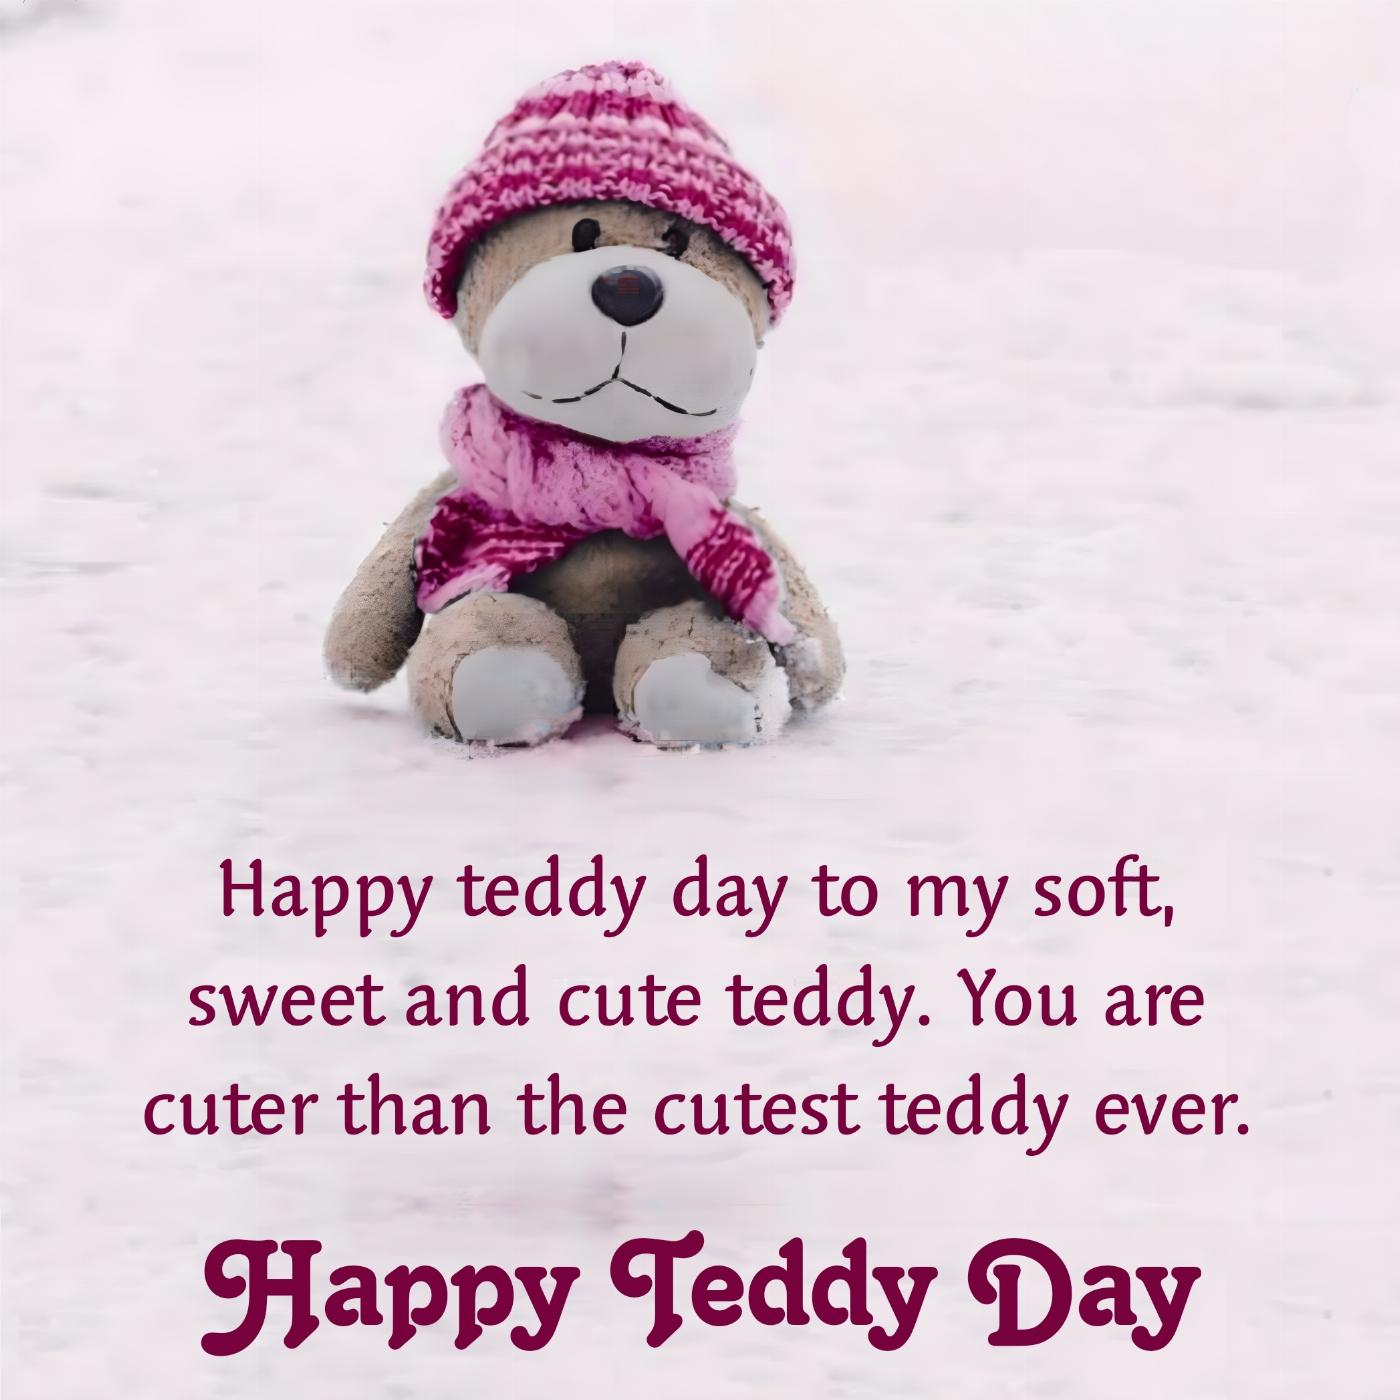 Happy teddy day to my soft sweet and cute teddy